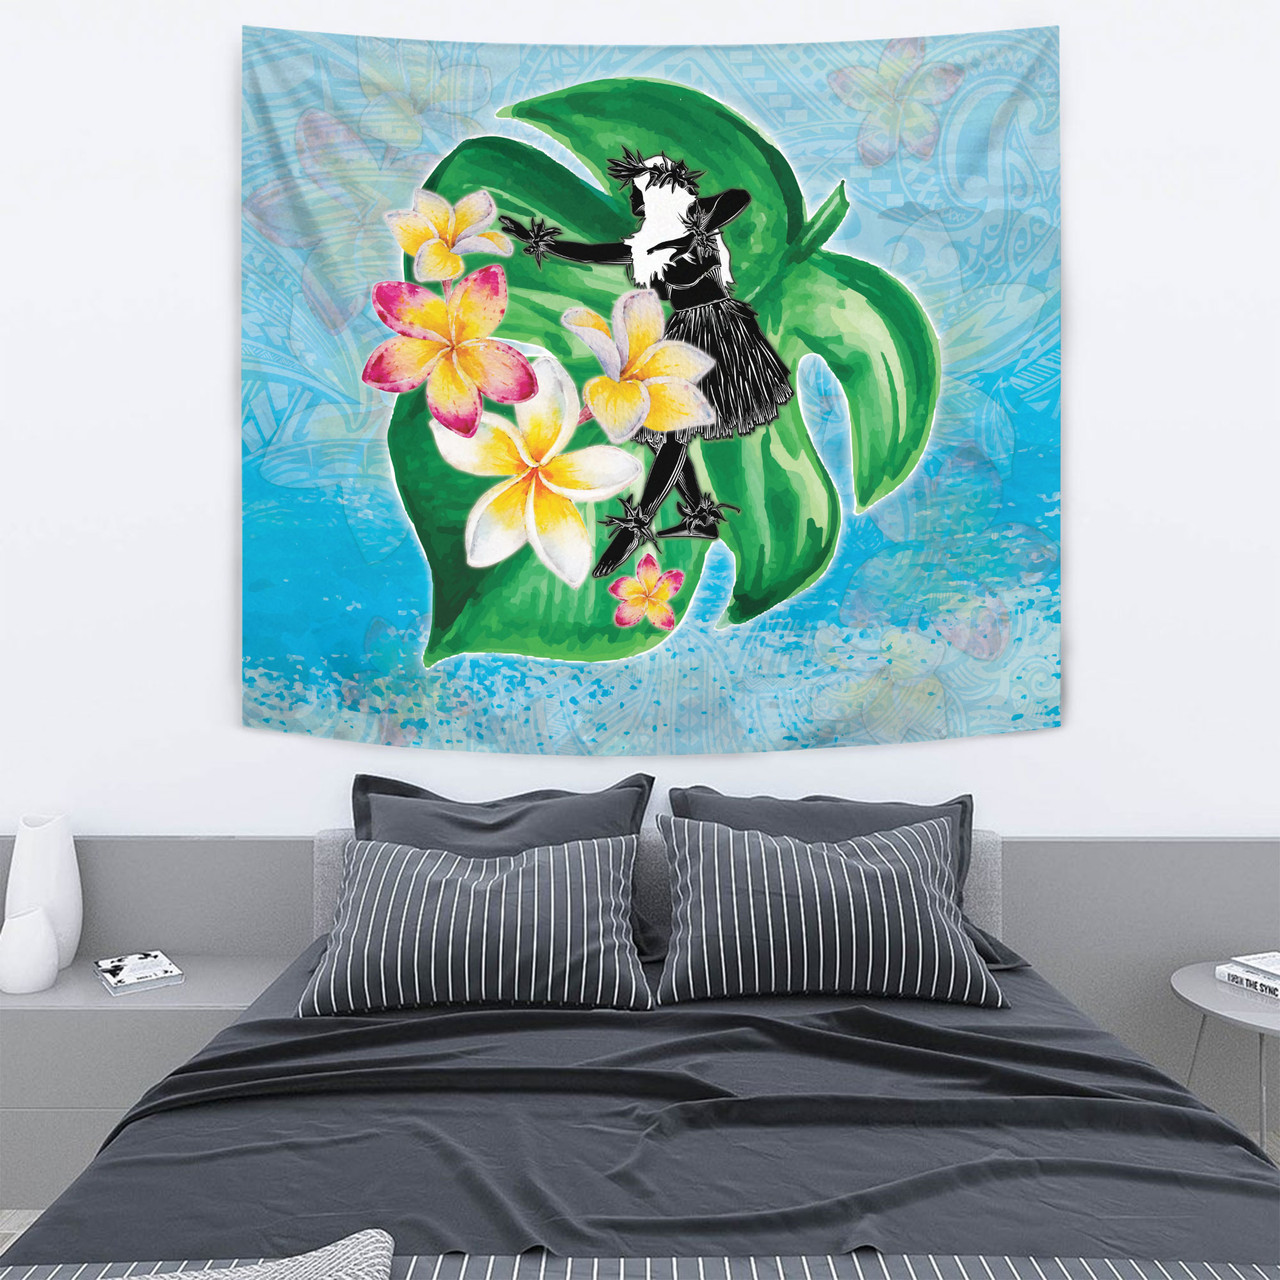 Hawaii Tapestry Hula Girls With Tropical Flowers Polynesian Style